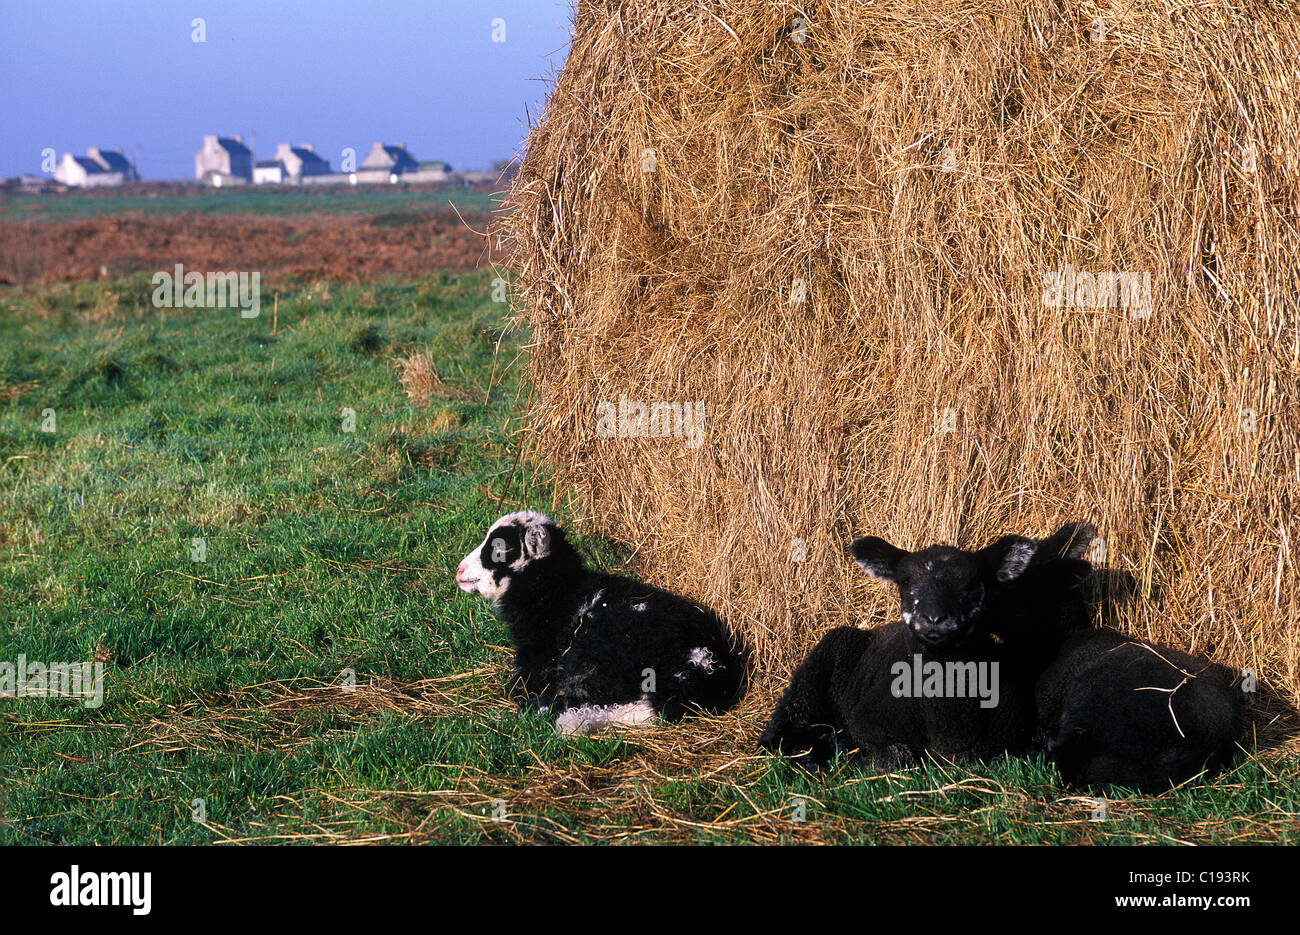 France, Finistere, Ouessant Island, young sheep near Keranchas Stock Photo